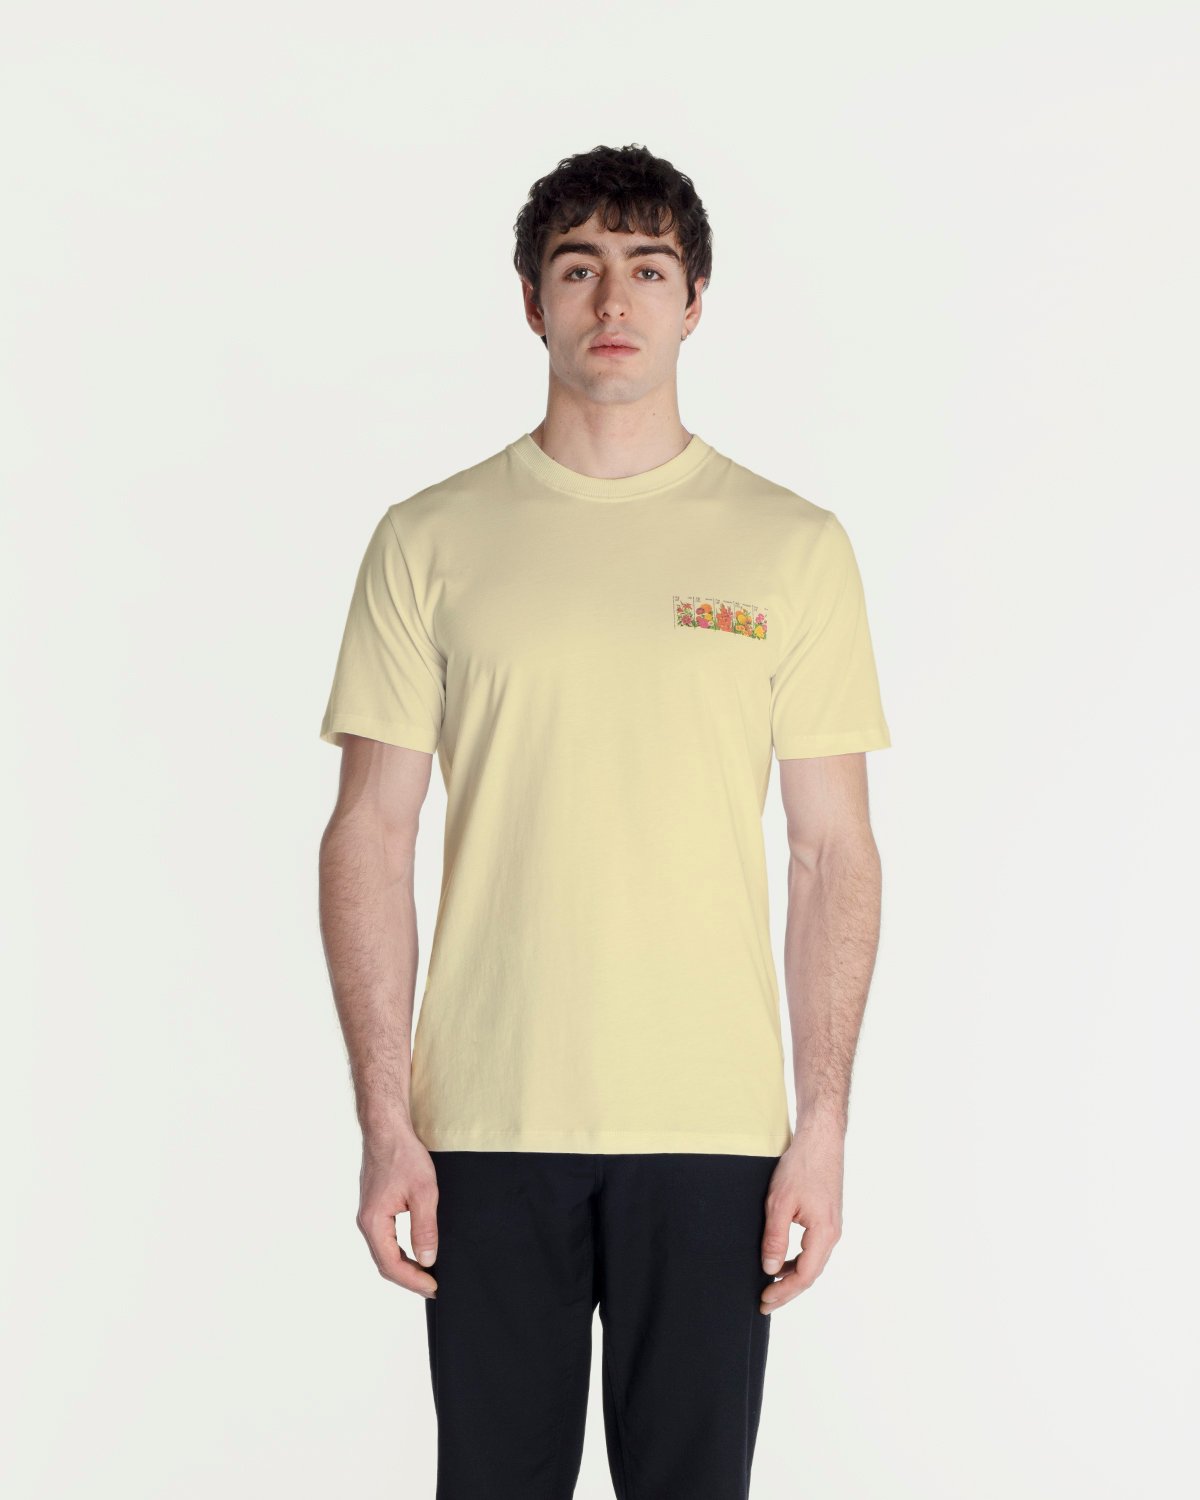 Soulland - Rossell S/S Yellow - Clothing - Yellow - Image 3